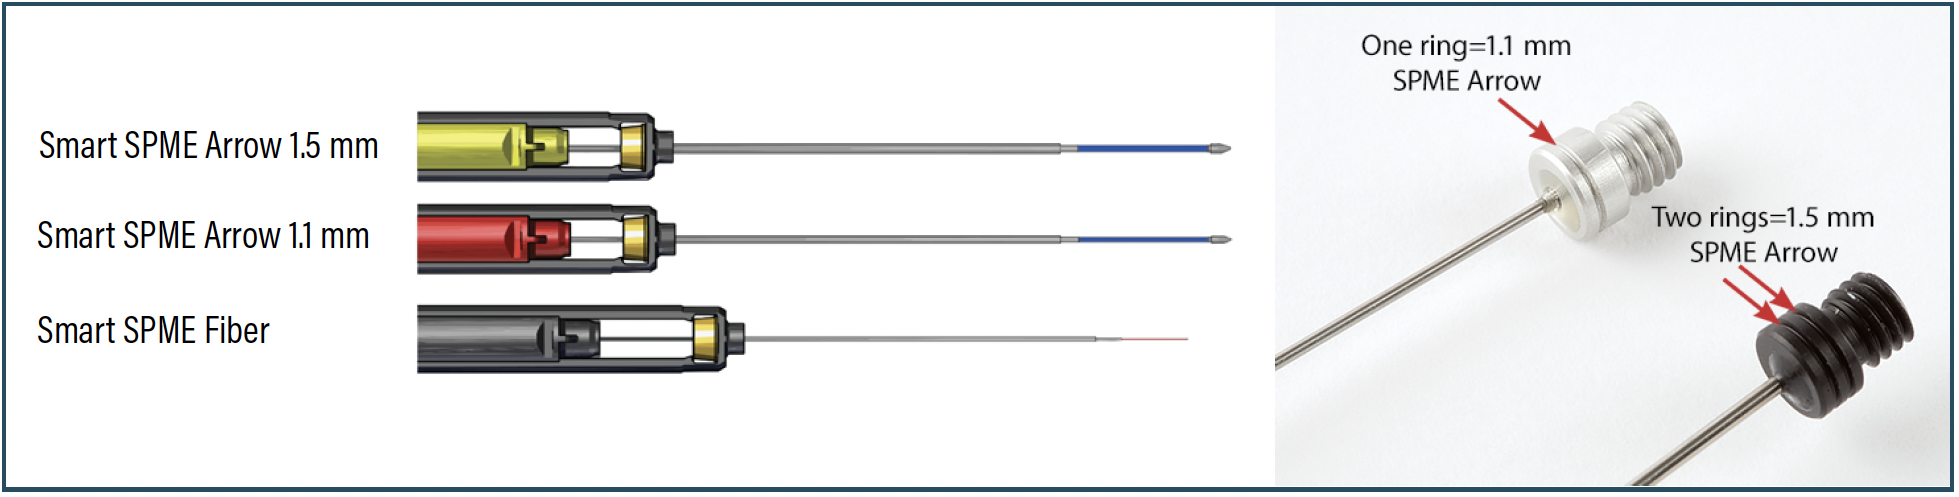 FIGURE 1: Smart SPME Arrows and fibers from Restek with a smart chip which tracks usage history, parameters, and ranges. SPME Smart Arrows are available in two sizes, 1.1 and 1.5 mm, distinguishable by color.